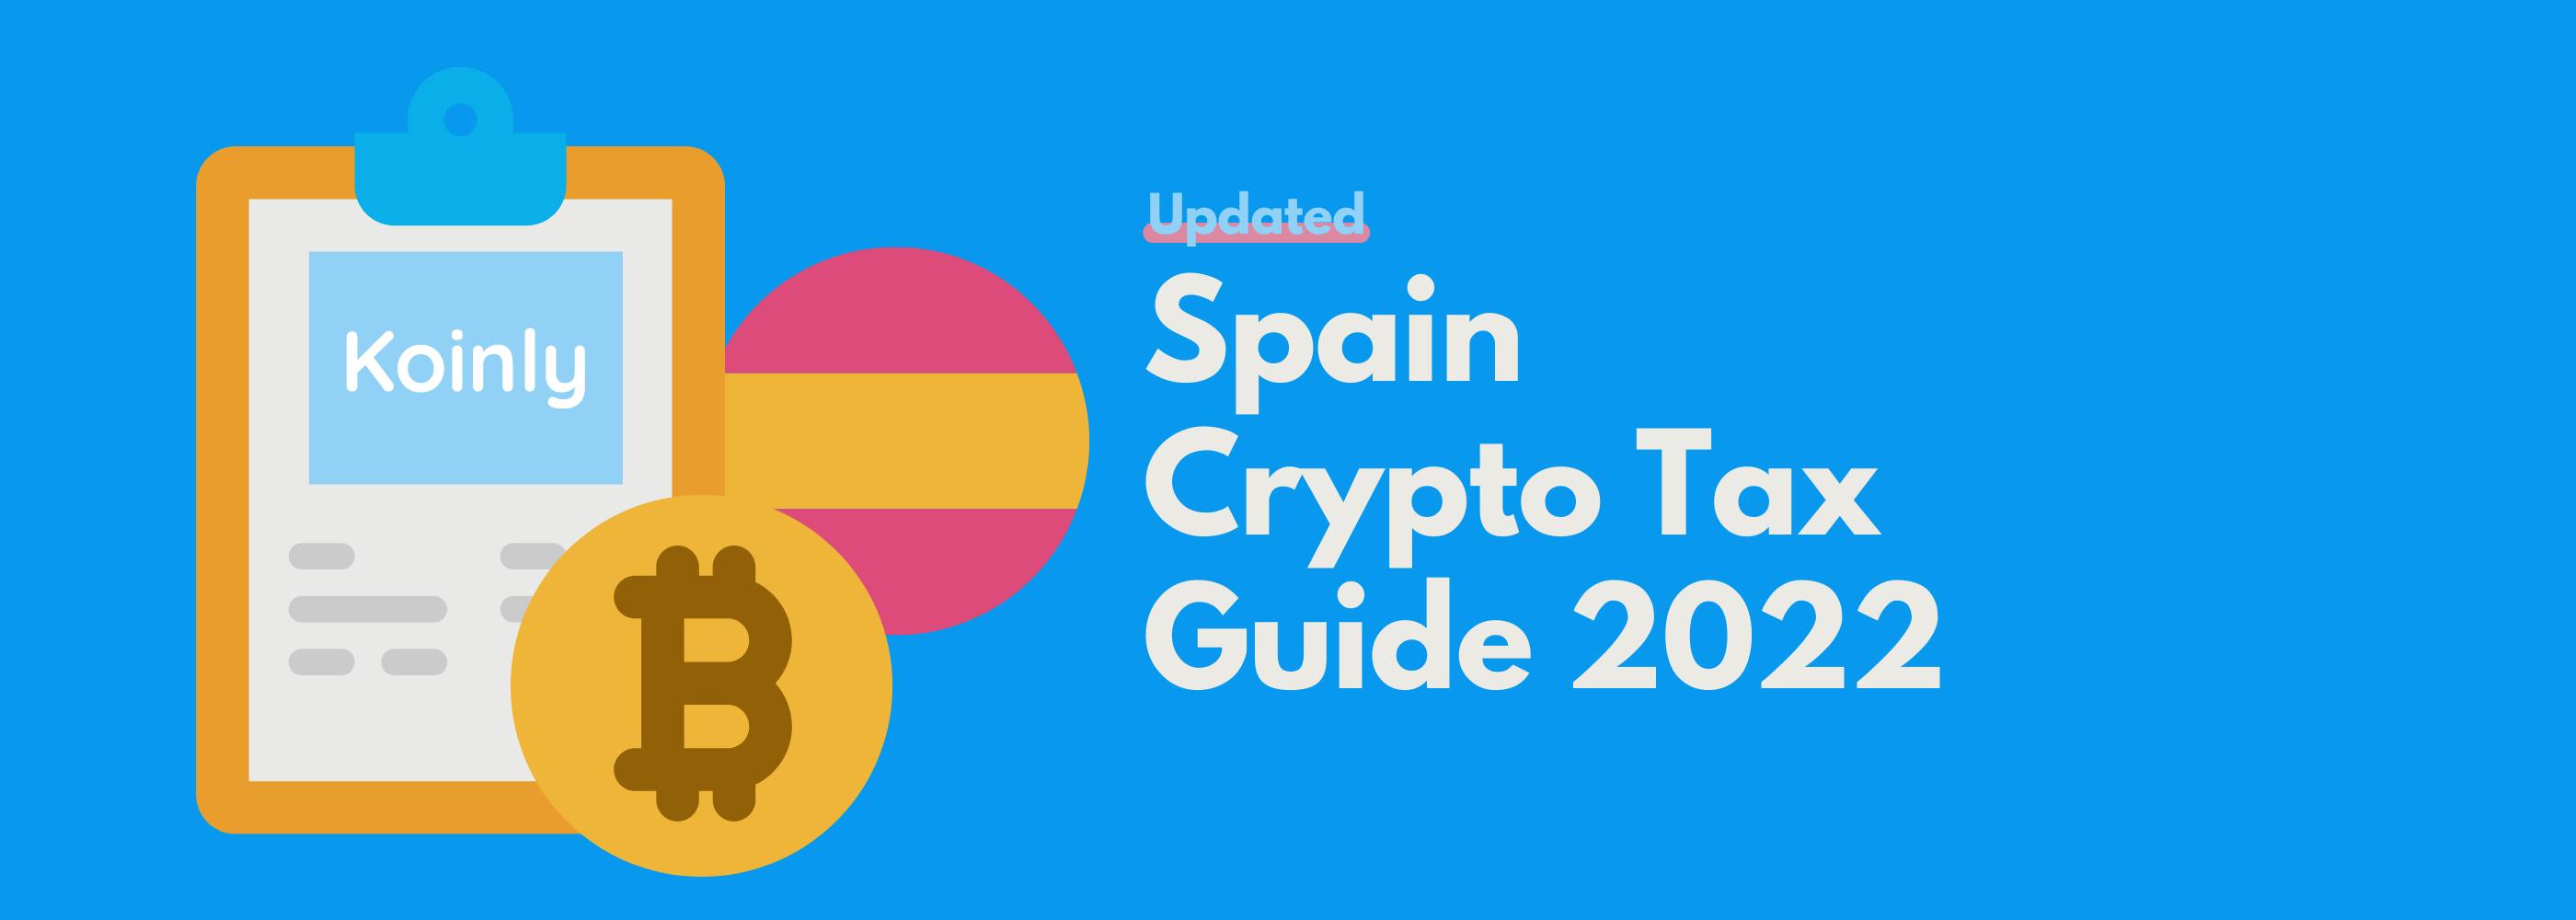 Spain crypto tax guide